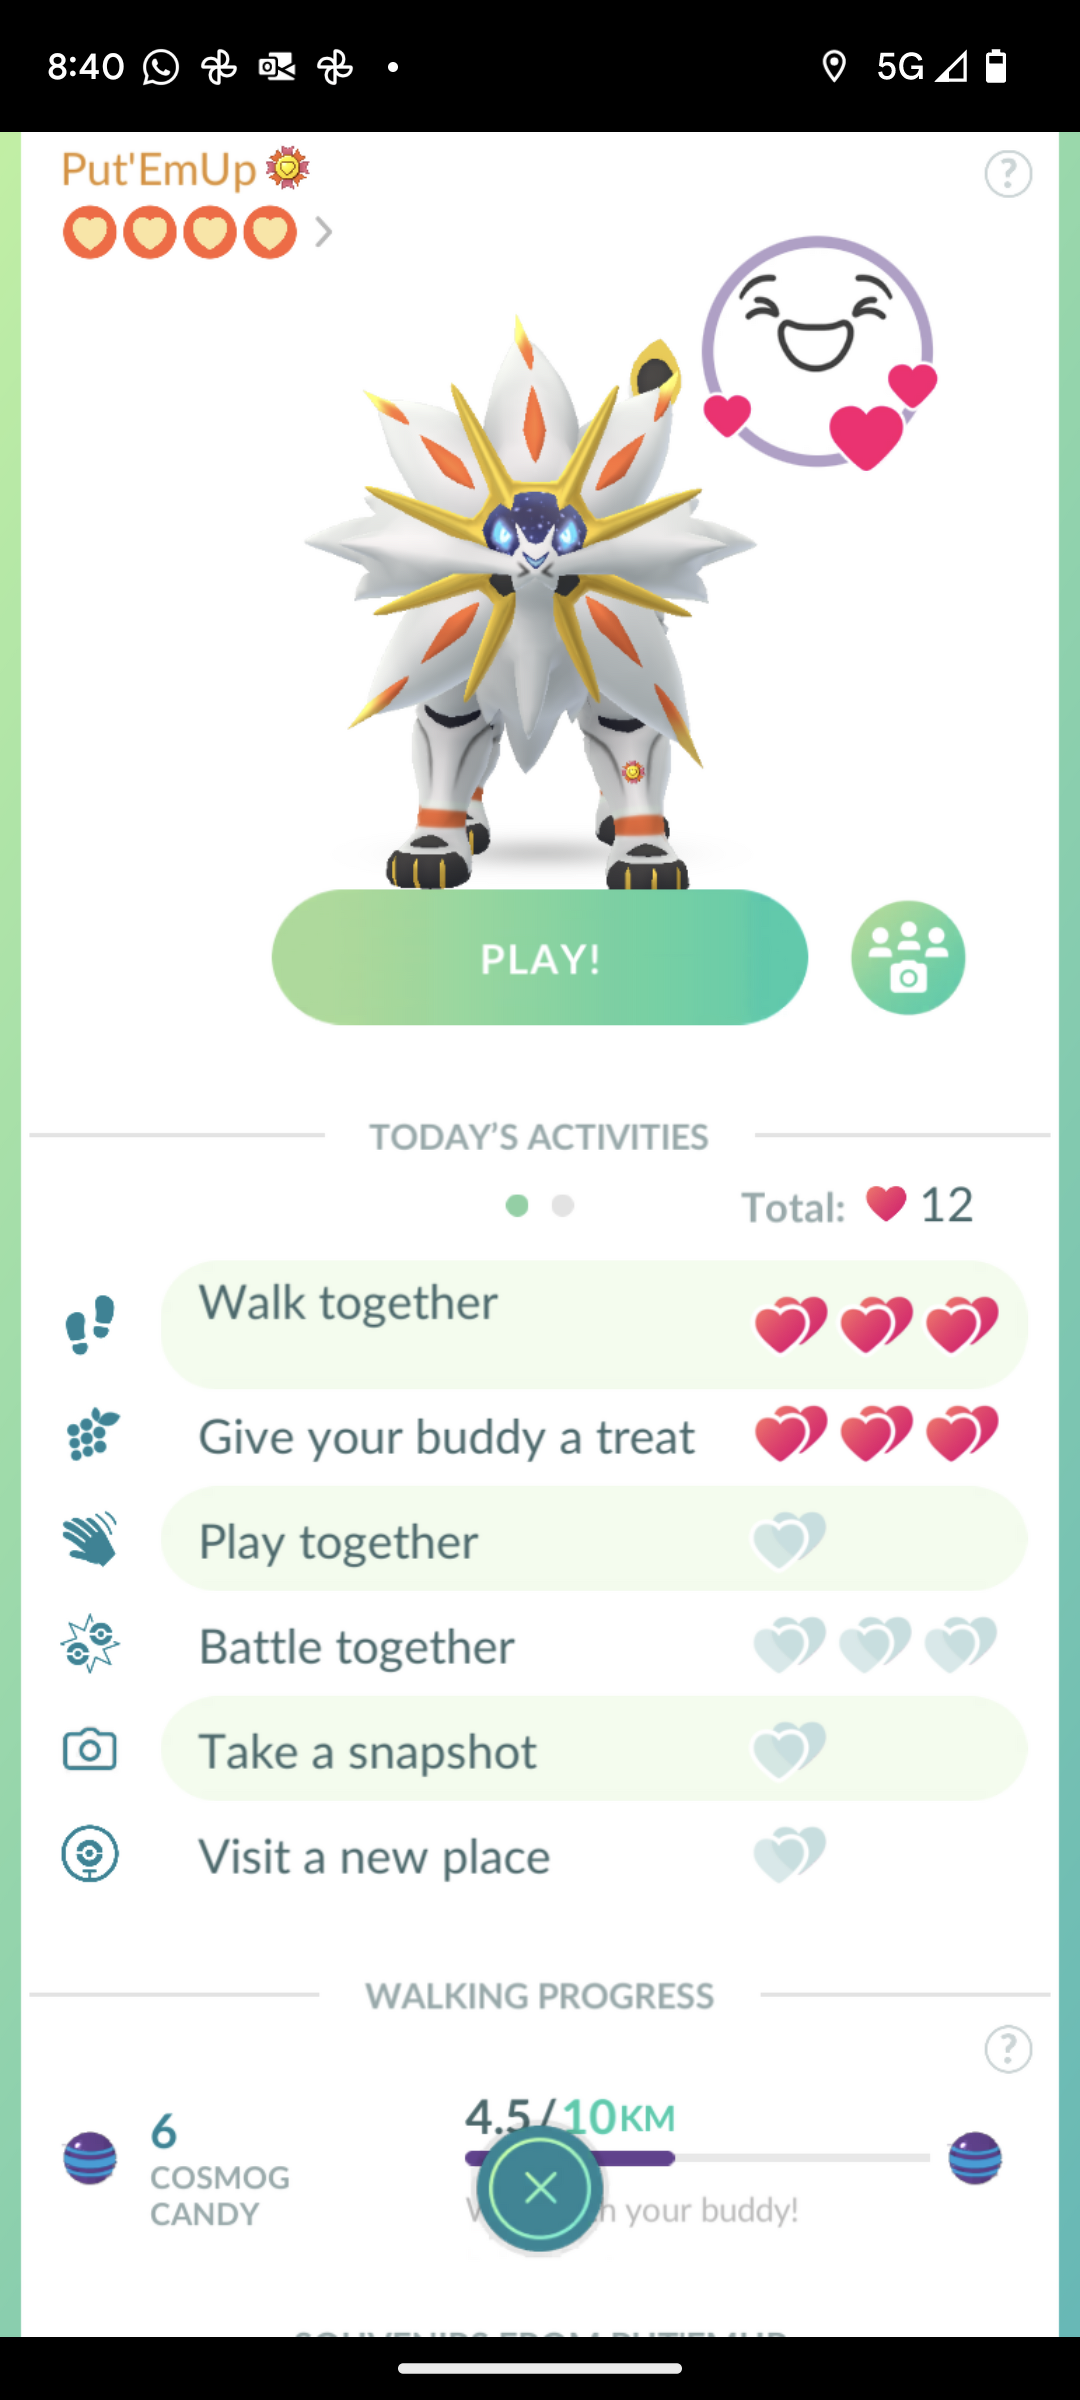 legend pokemon does not appear on maps - Report Bugs & Errors